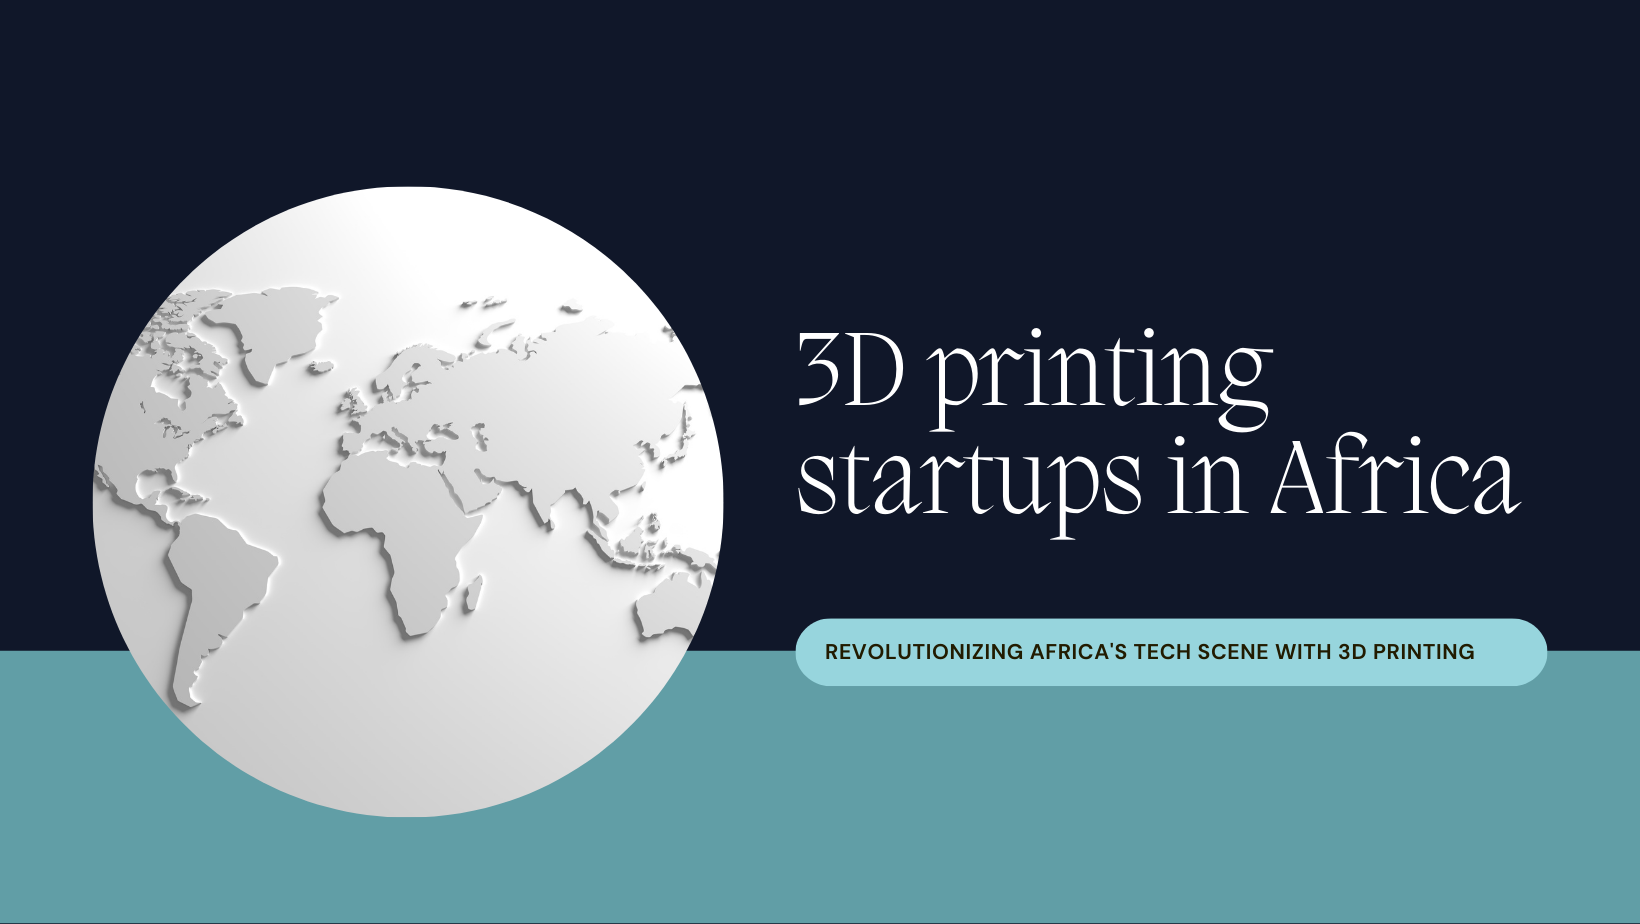 3D printing startups in Africa